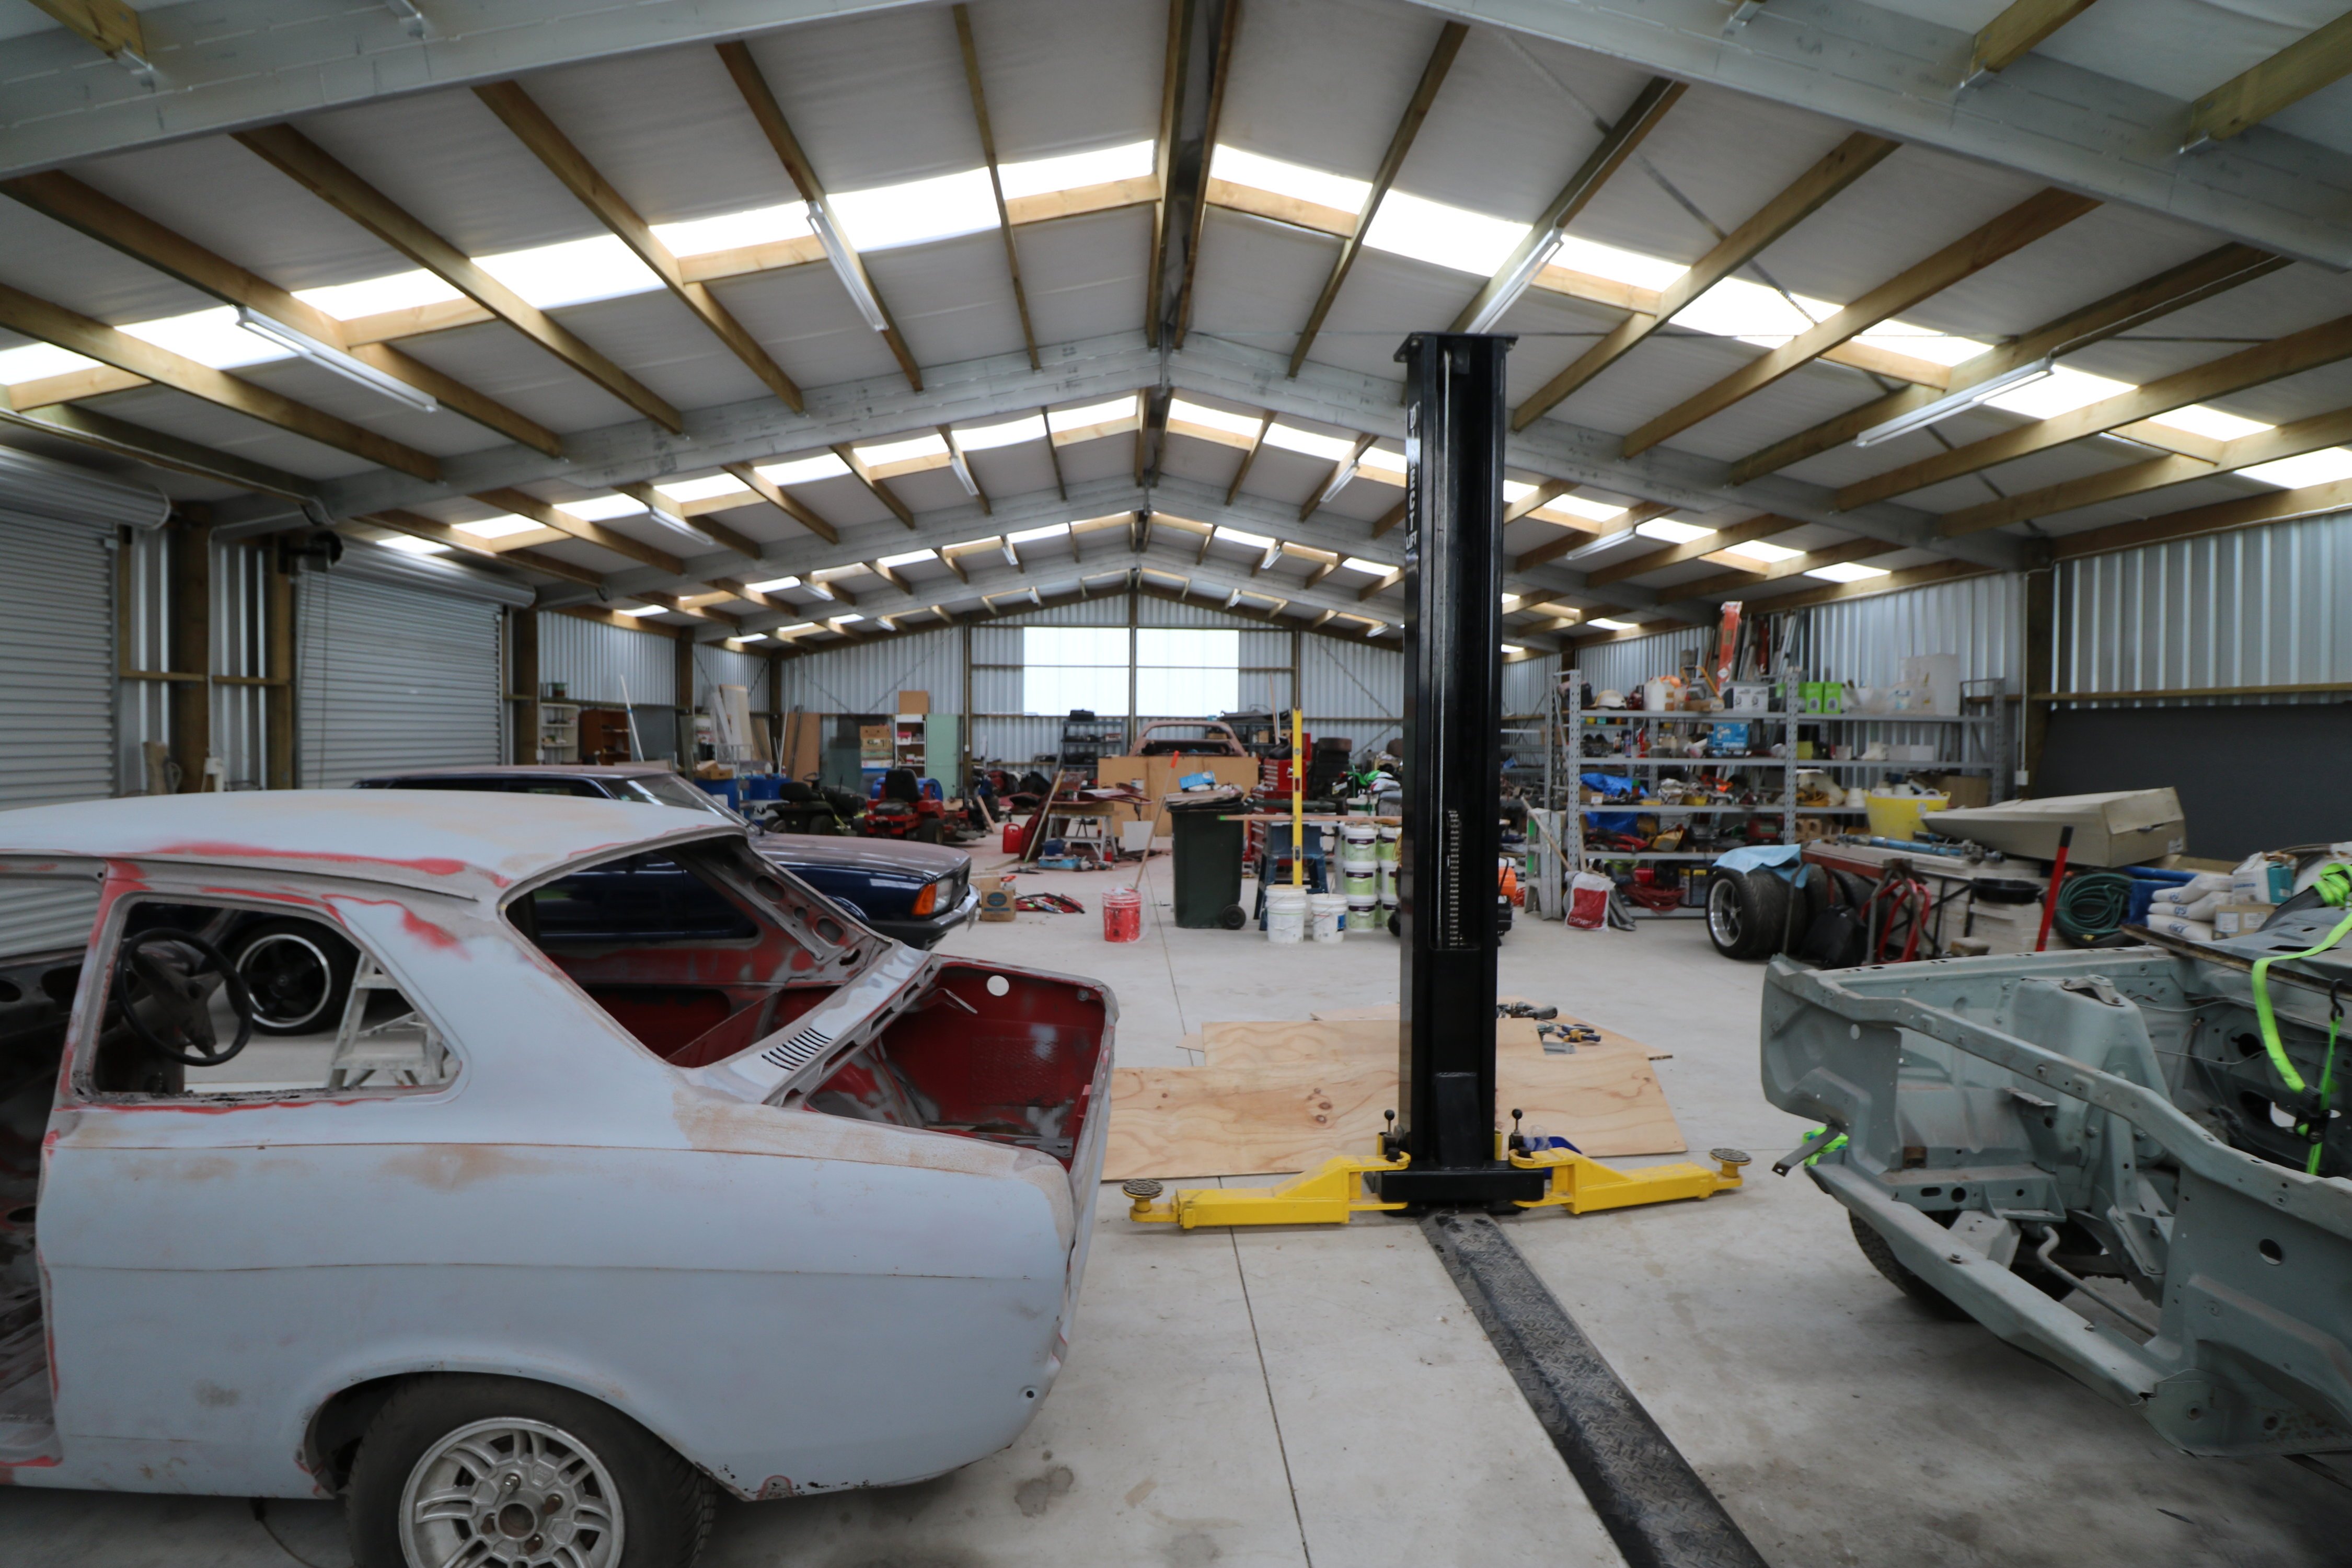 This workshop has plenty of space to store and work on a range of cars